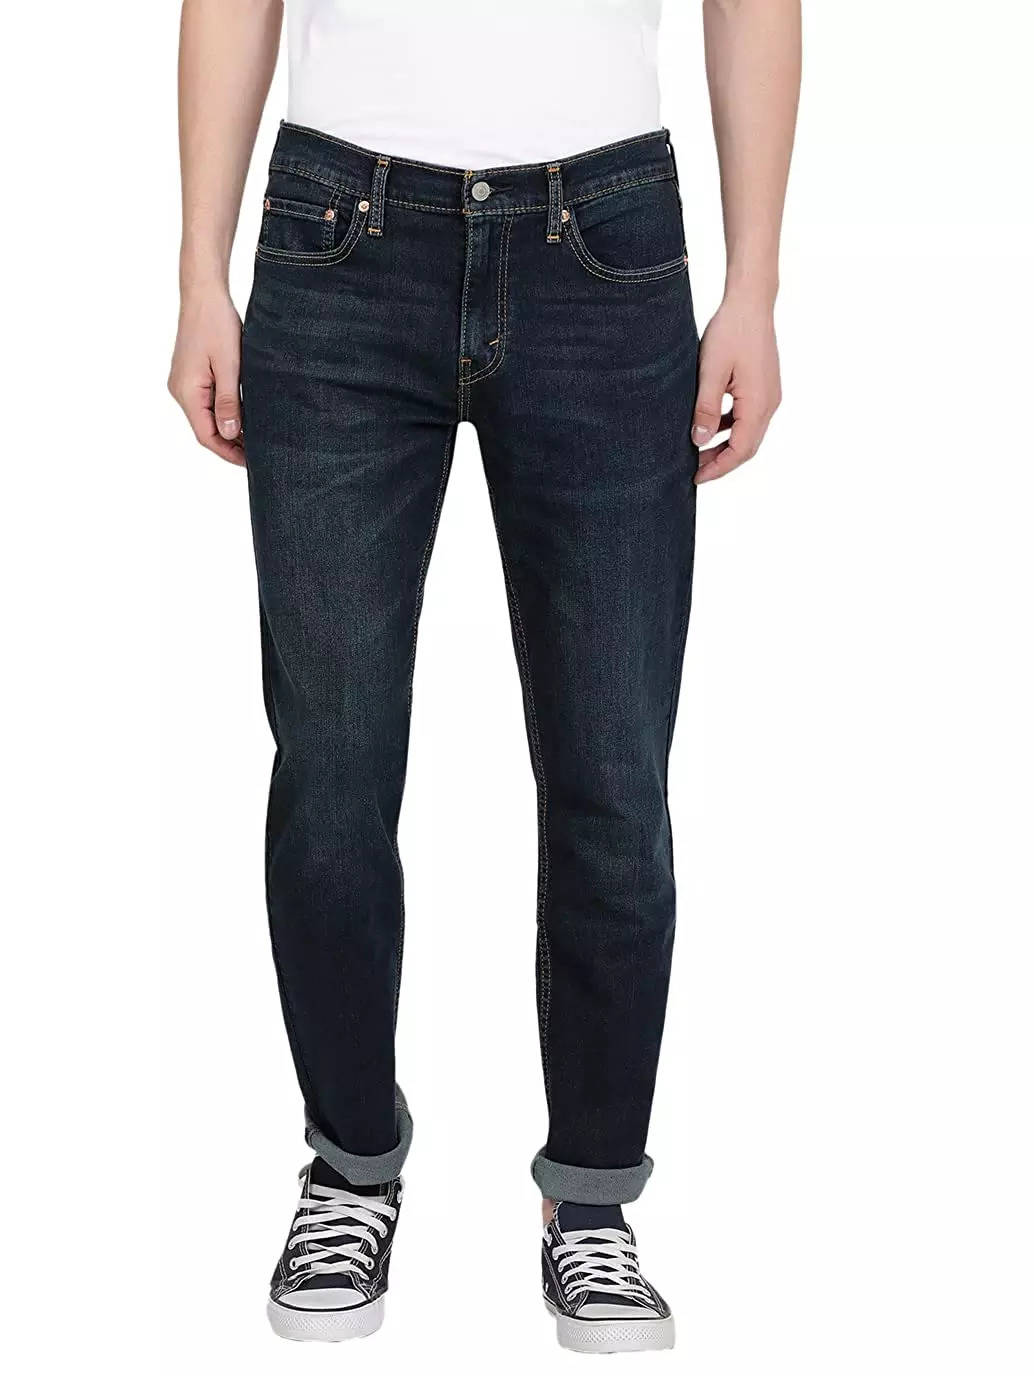 Jeans for Men Under 3000: 6 Best Jeans for Men Under 3000 in India to ...